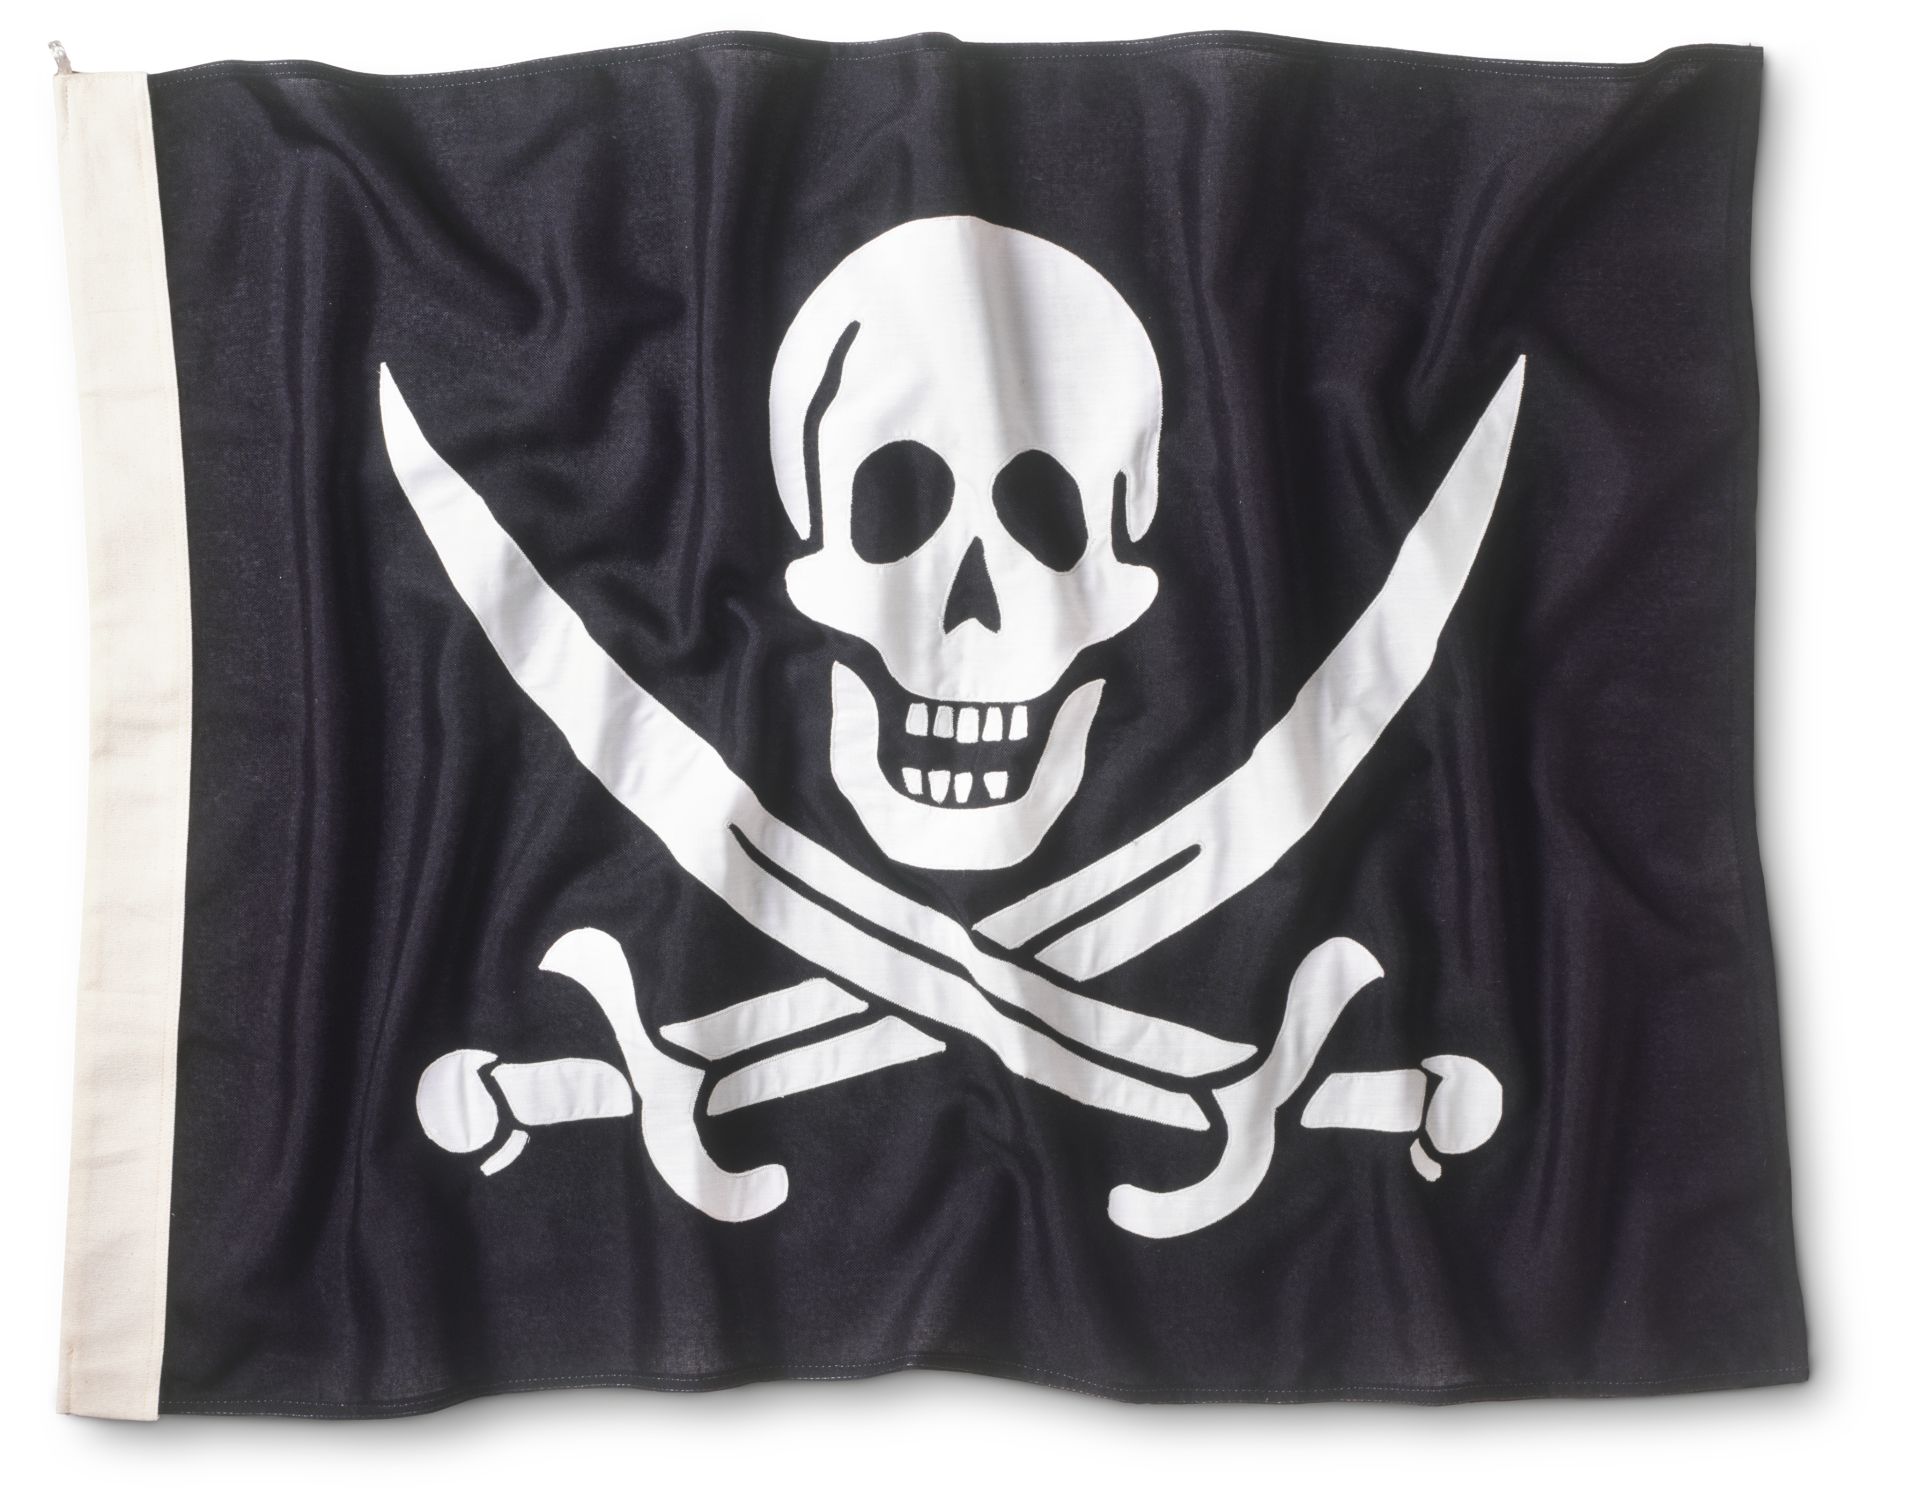 HISTORY OF THE JOLLY ROGER